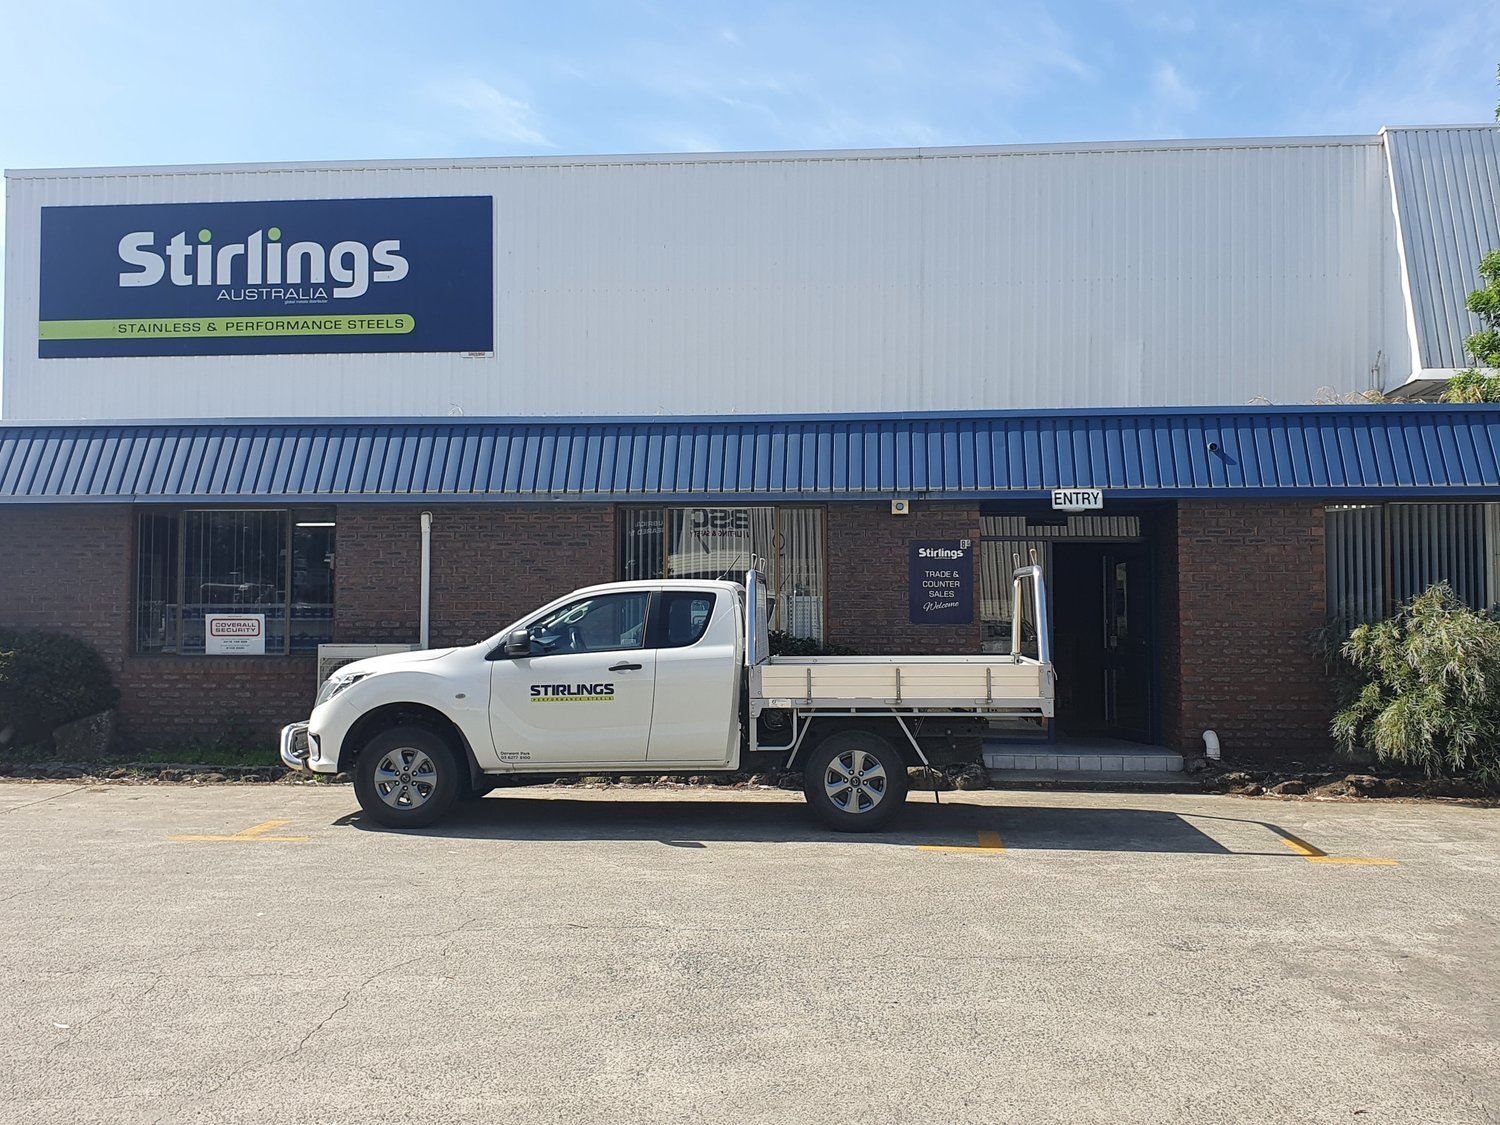 Our second branch at 8 Lampton Ave, Derwent Park, TAS